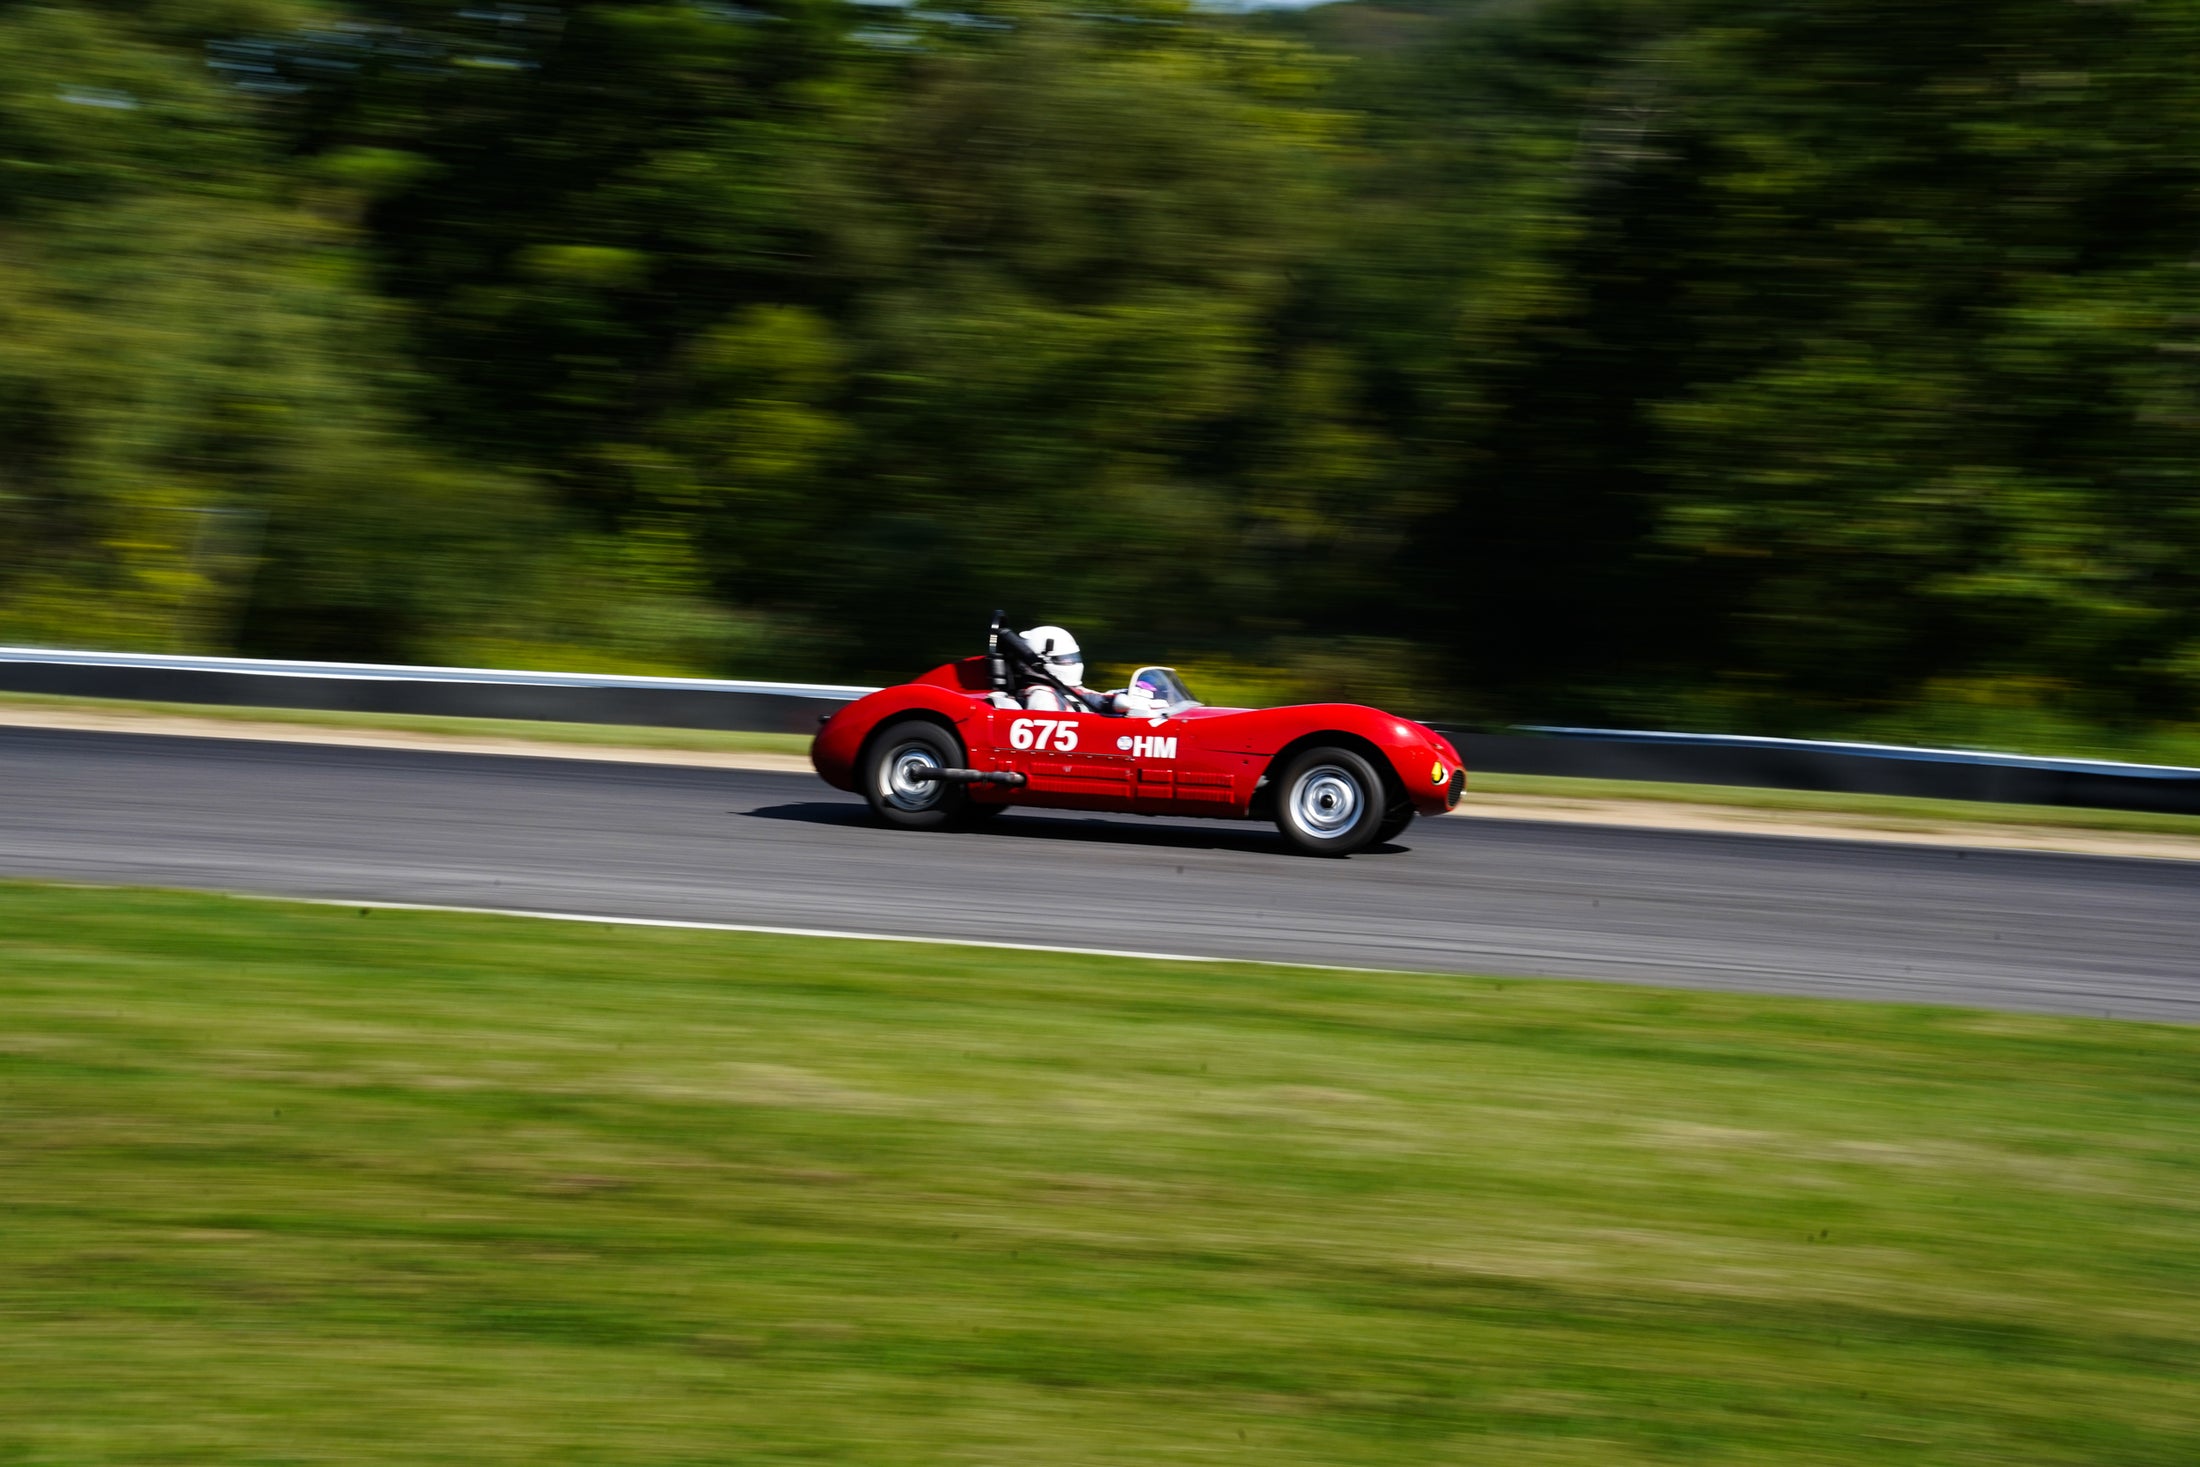 Photo Recap: A Weekend of Vintage Racing & Watch Spotting at Historic Festival 41